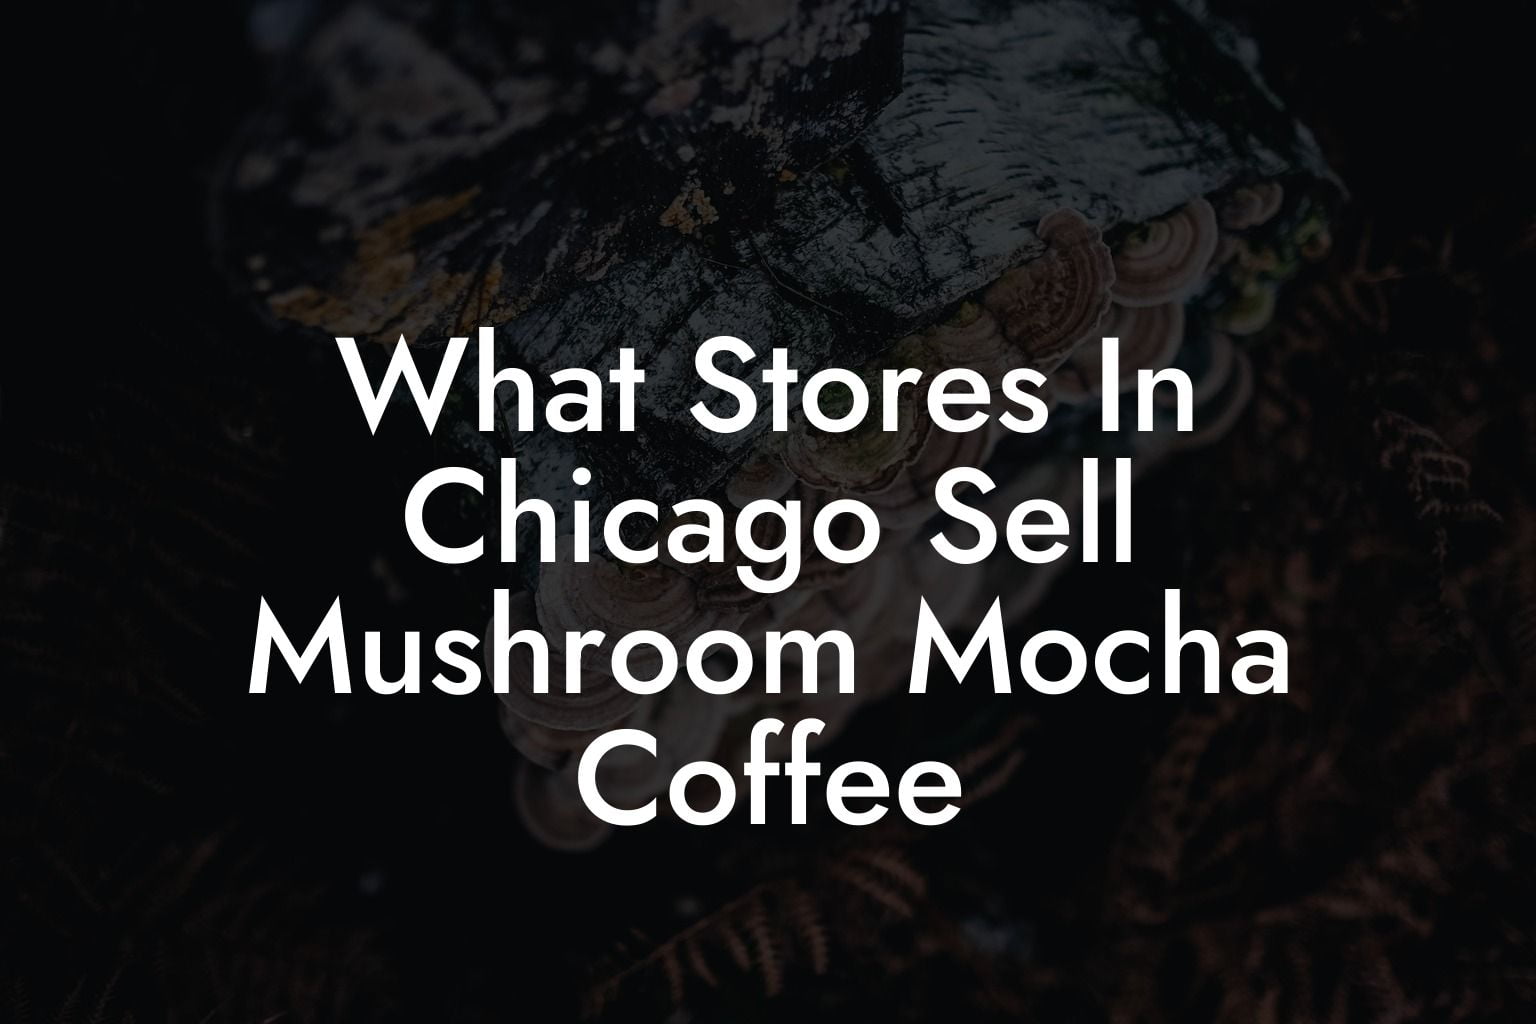 What Stores In Chicago Sell Mushroom Mocha Coffee